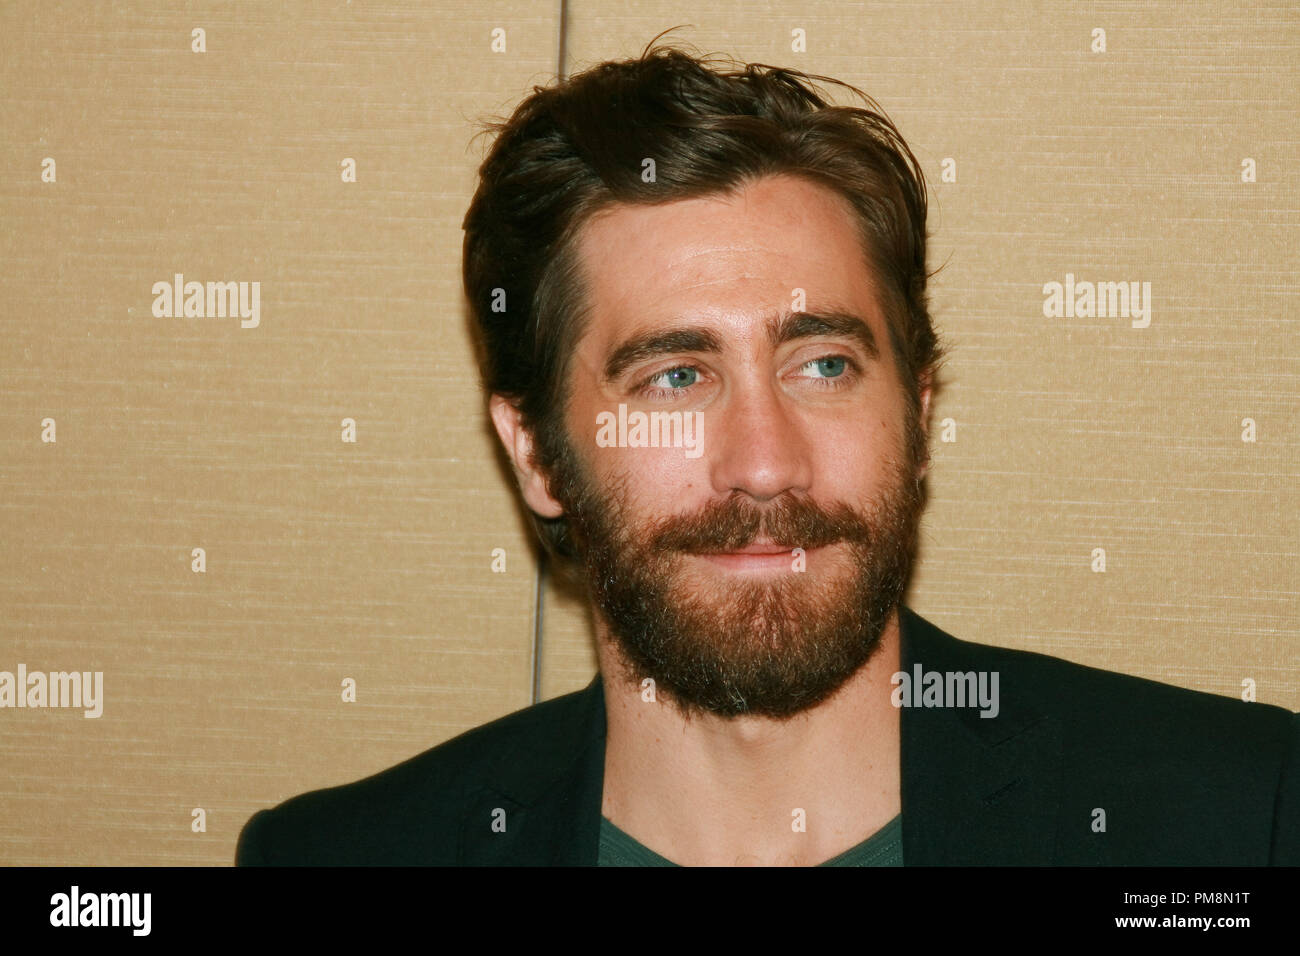 Jake Gyllenhaal 'End of Watch' Portrait Session, September 10, 2012.  Reproduction by American tabloids is absolutely forbidden. File Reference # 31670 017JRC  For Editorial Use Only -  All Rights Reserved Stock Photo